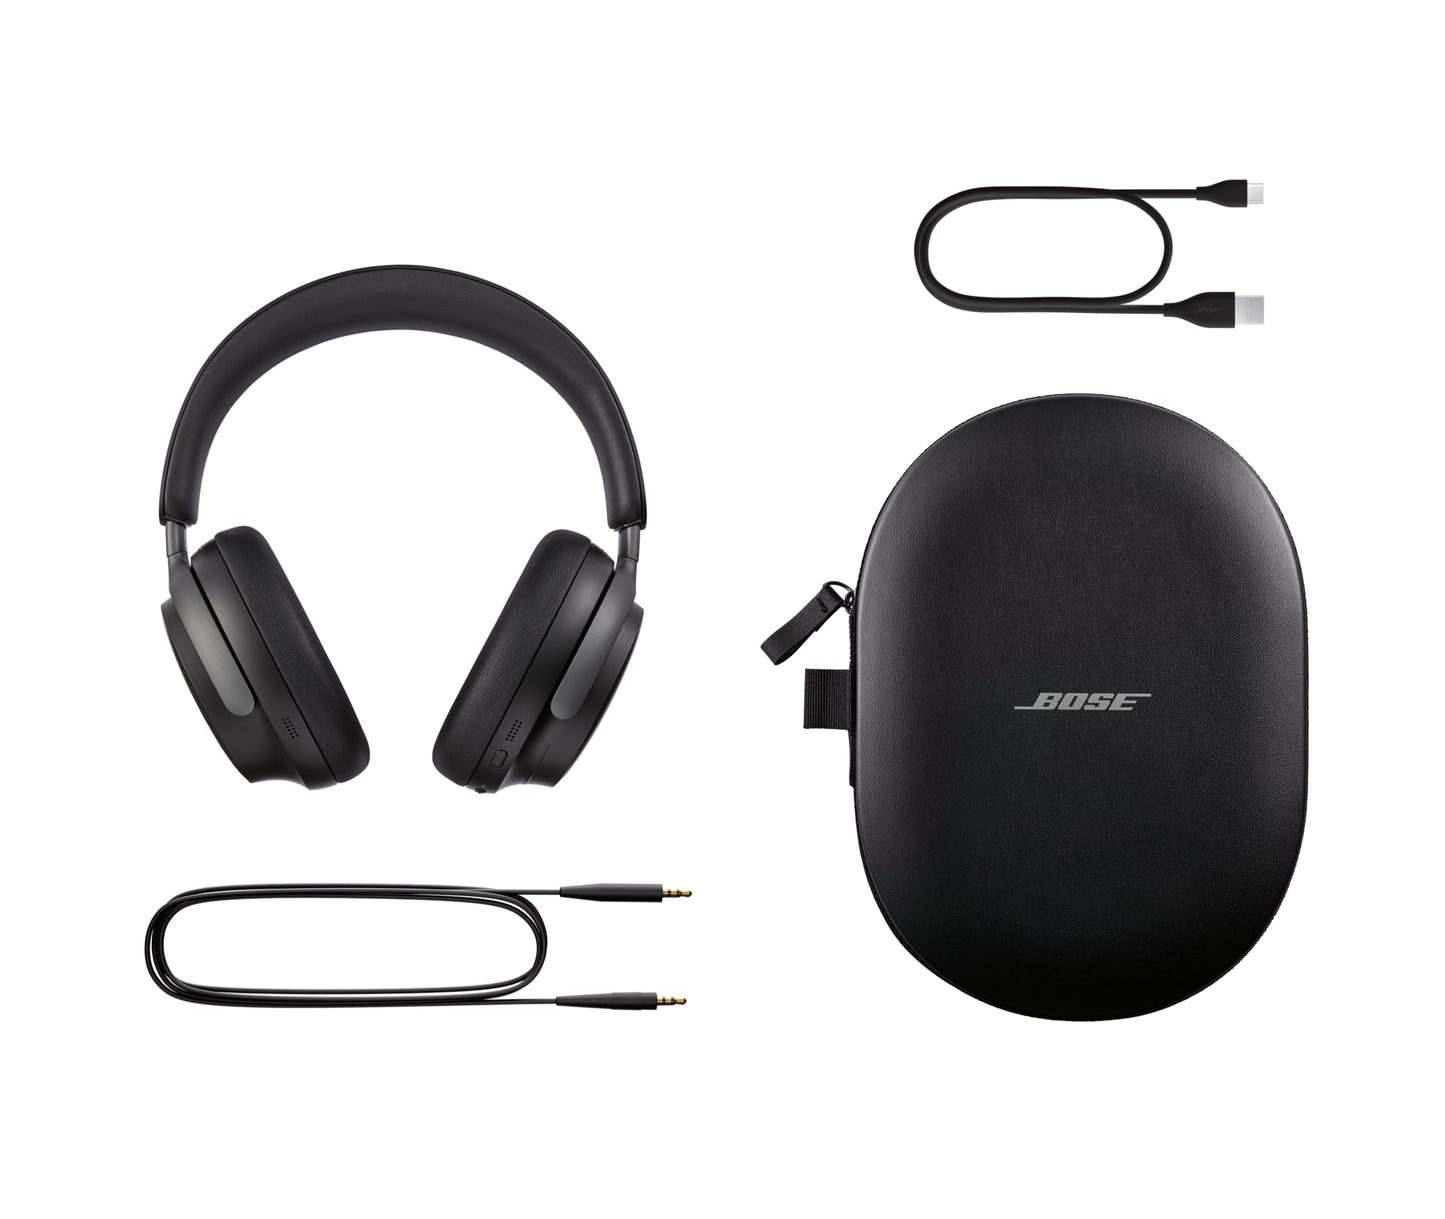 Bose QuietComfort Ultra Wireless Noise Cancelling Headphones with Spatial Audio, Over-the-Ear Headphones with Mic, Up to 24 Hours of Battery Life, Black